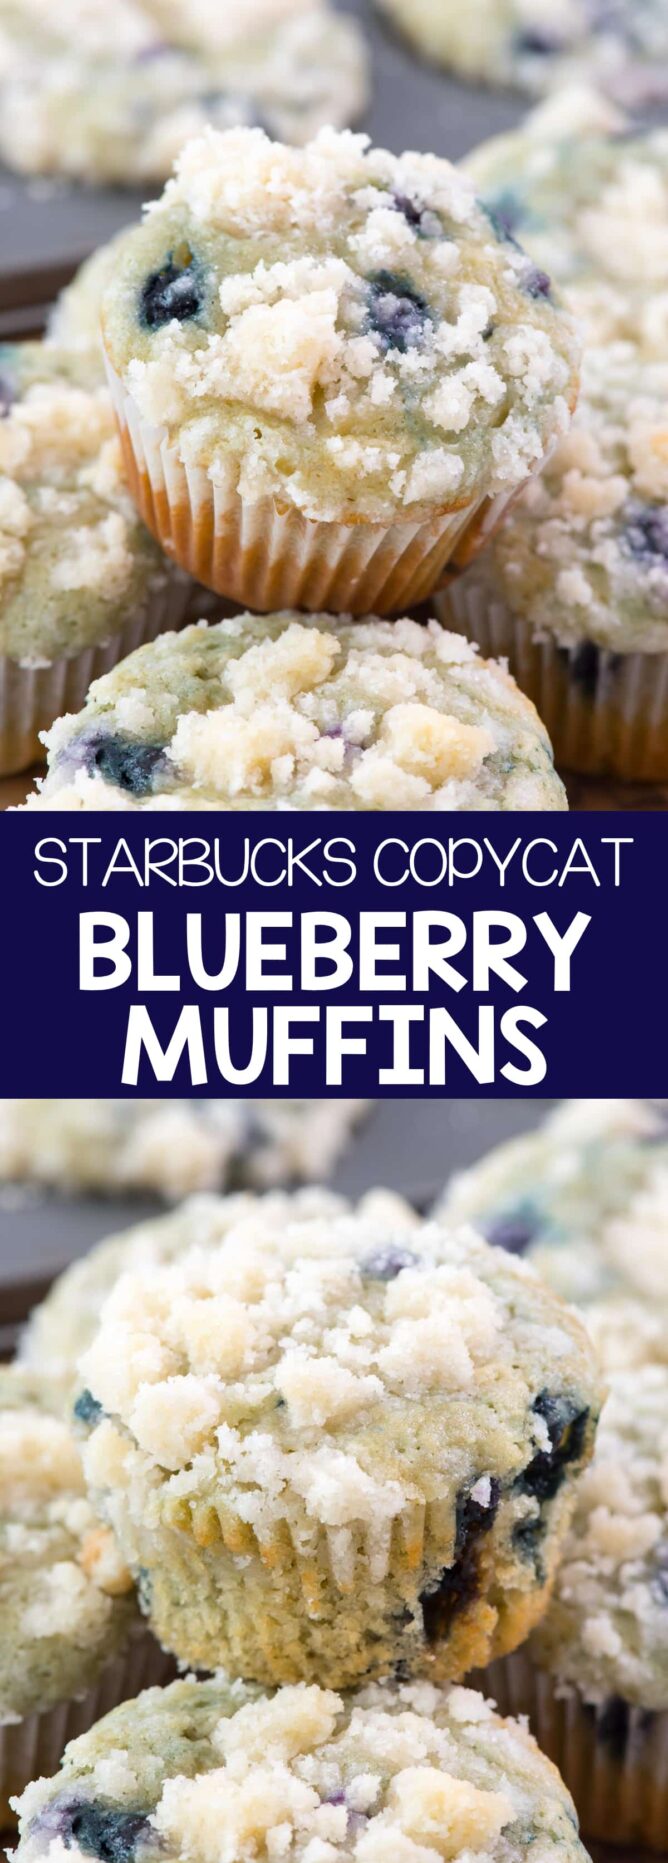 Collage of 2 pictures of Starbucks Copycat Blueberry Muffins